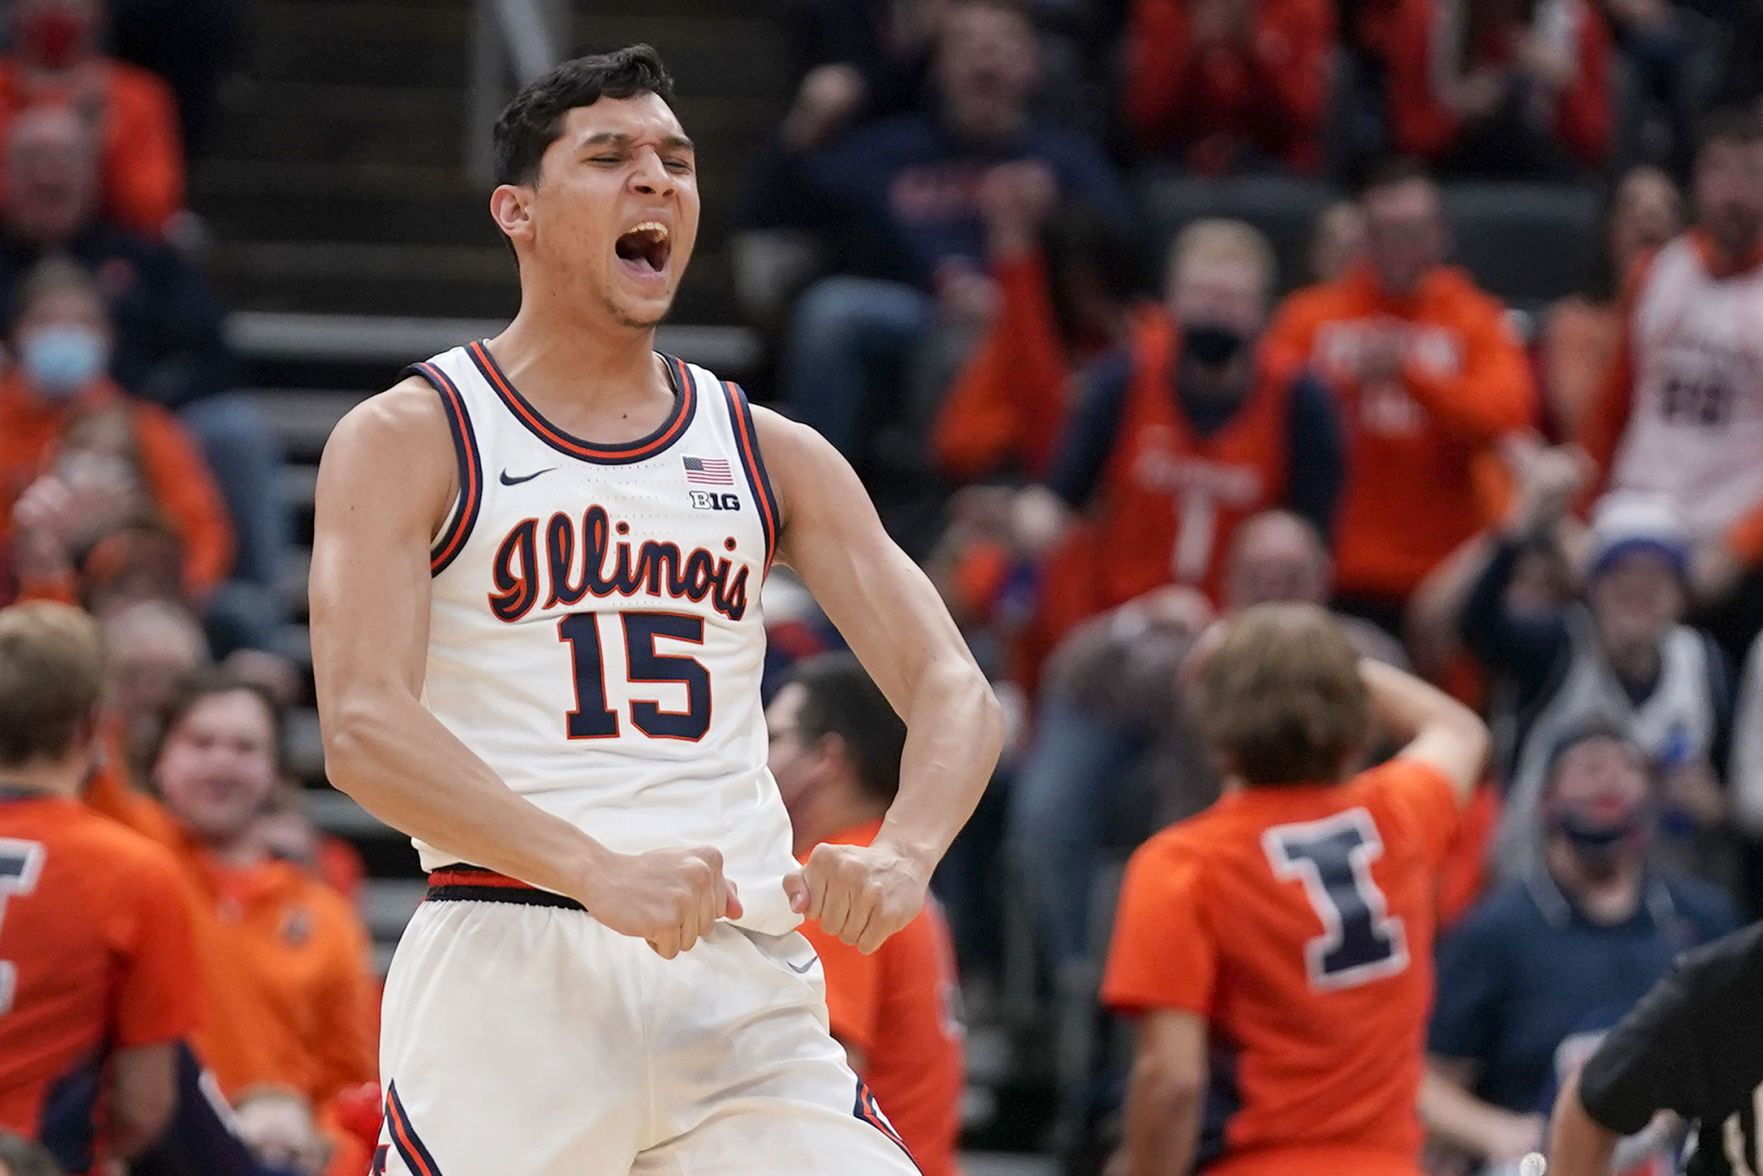 Illinois mens basketball with new-look style and roster for 2022-23